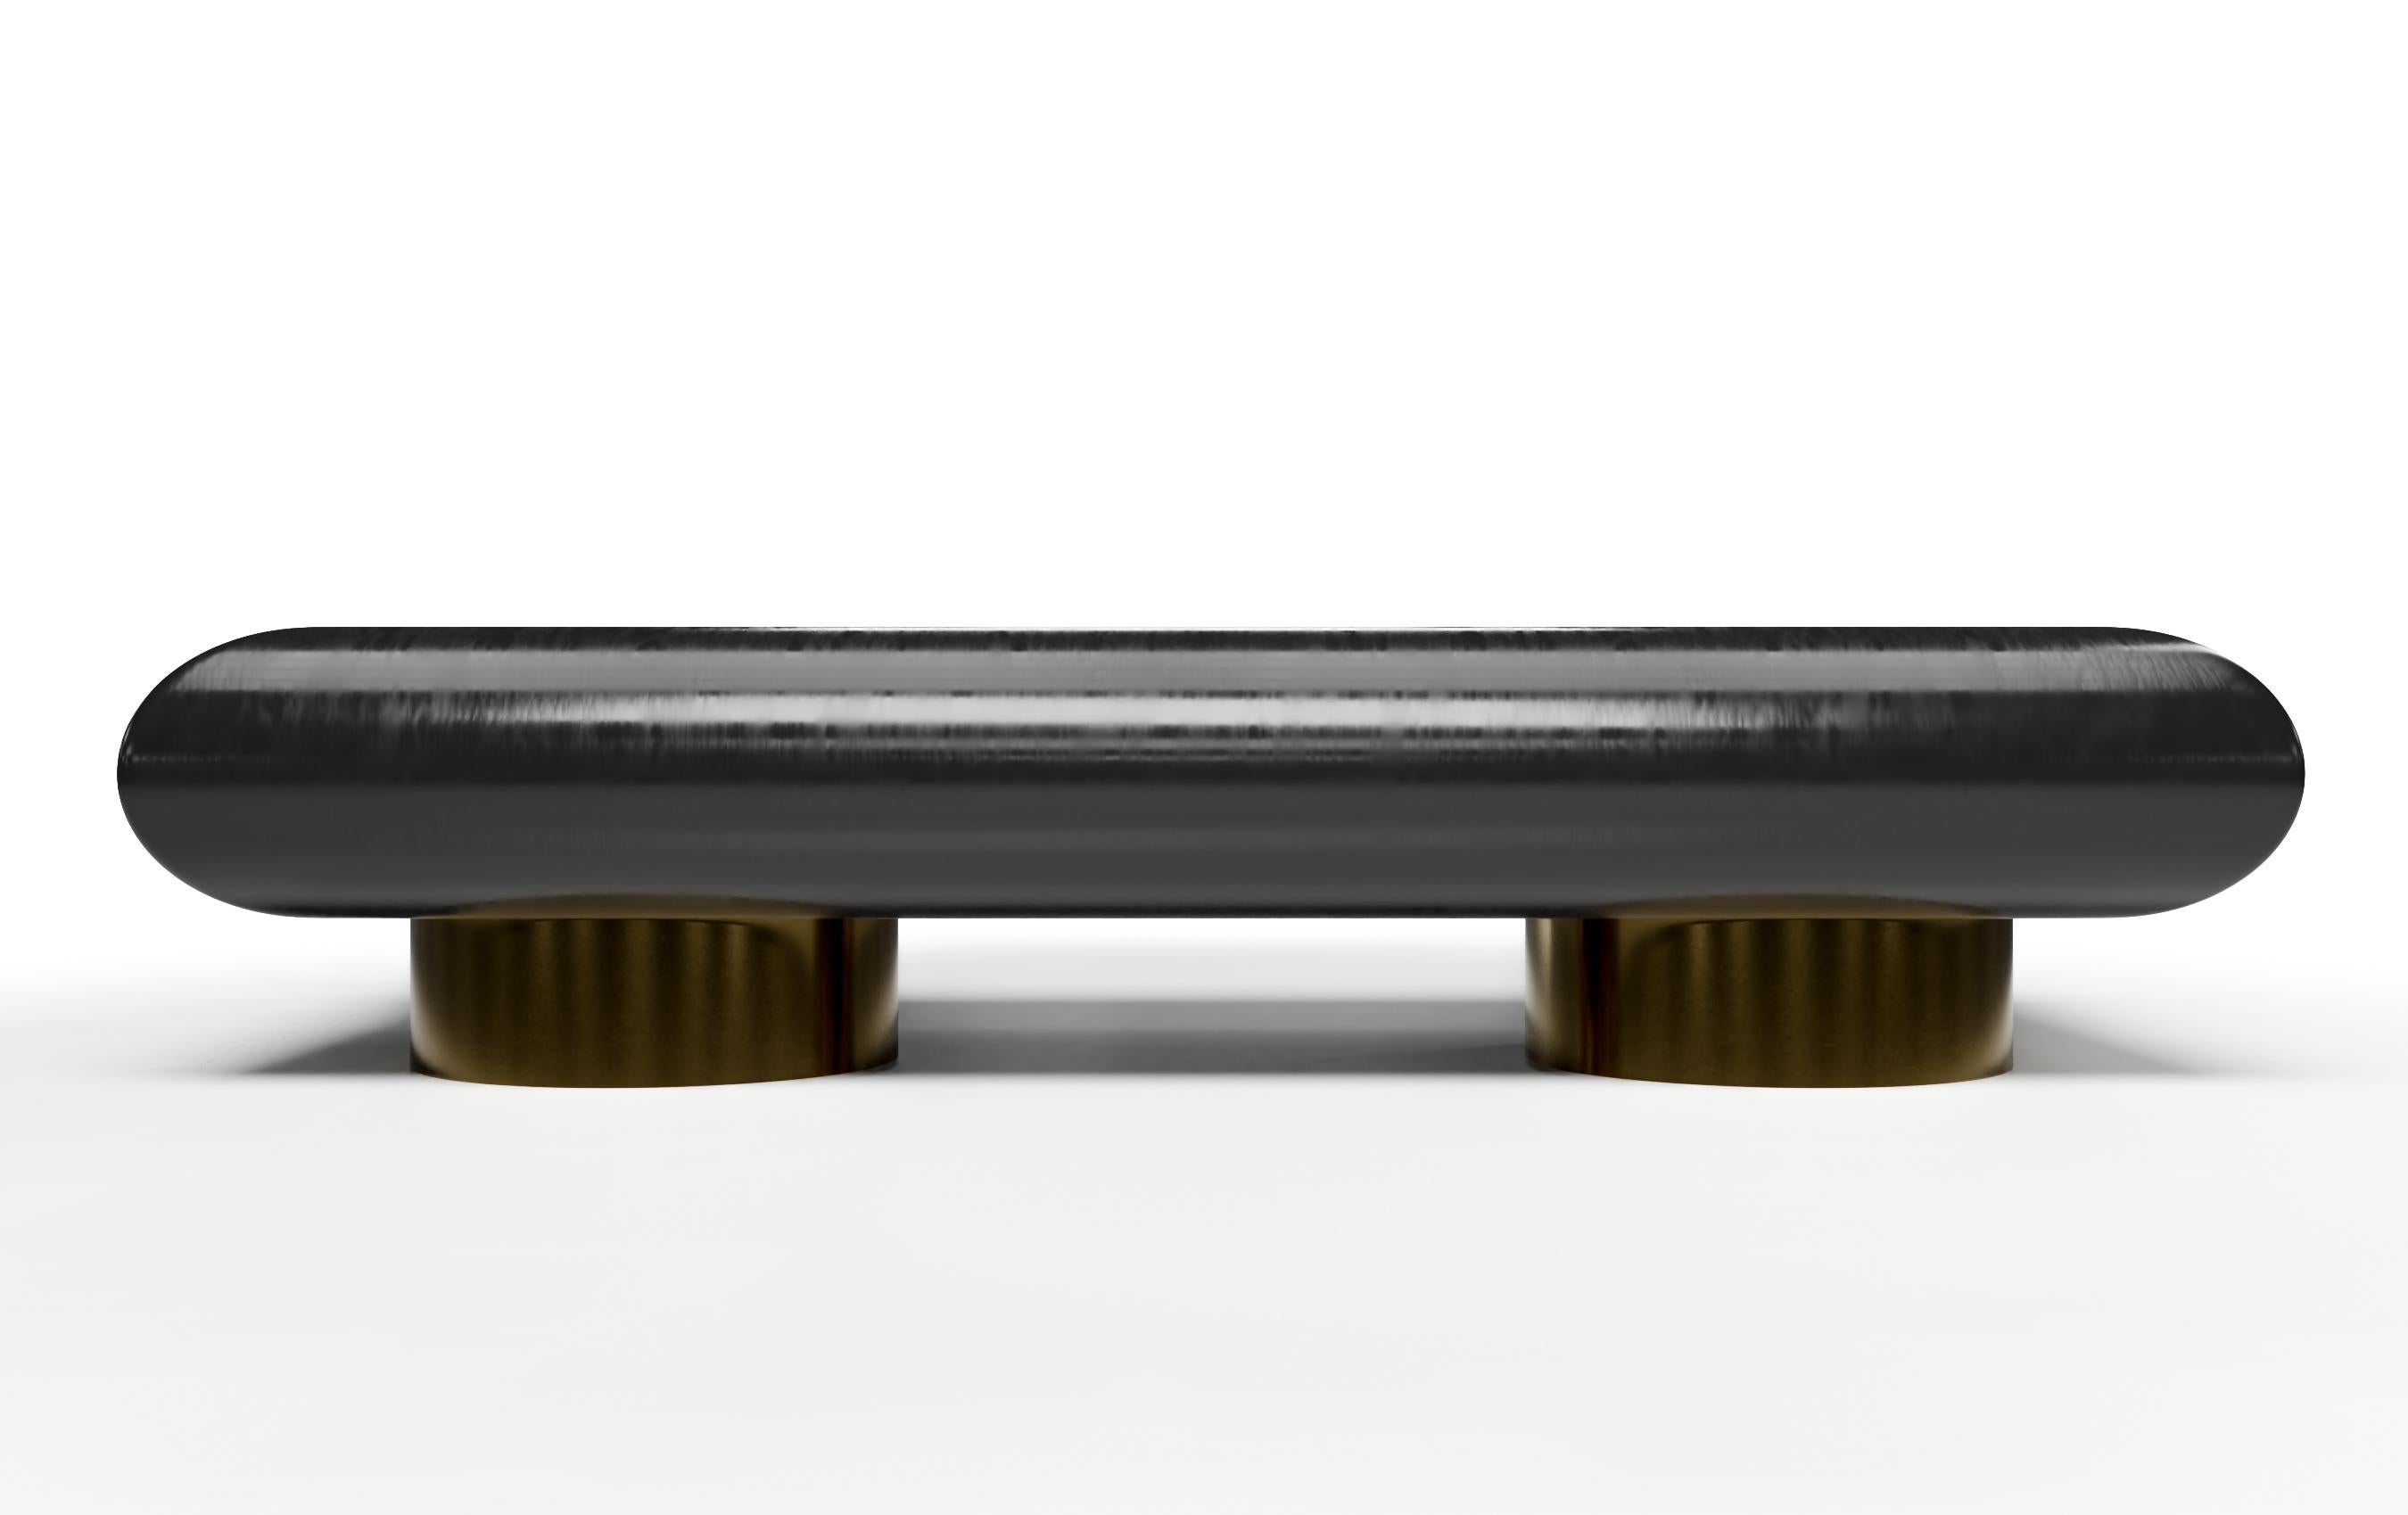 Creative director Susan Hornbeak Ortiz has created an iconic collection for her new Ortiz Milano brand that is designed in California and handcrafted in Milan, Italy. The Carmel coffee table is a true statement of form and function. The coffee table